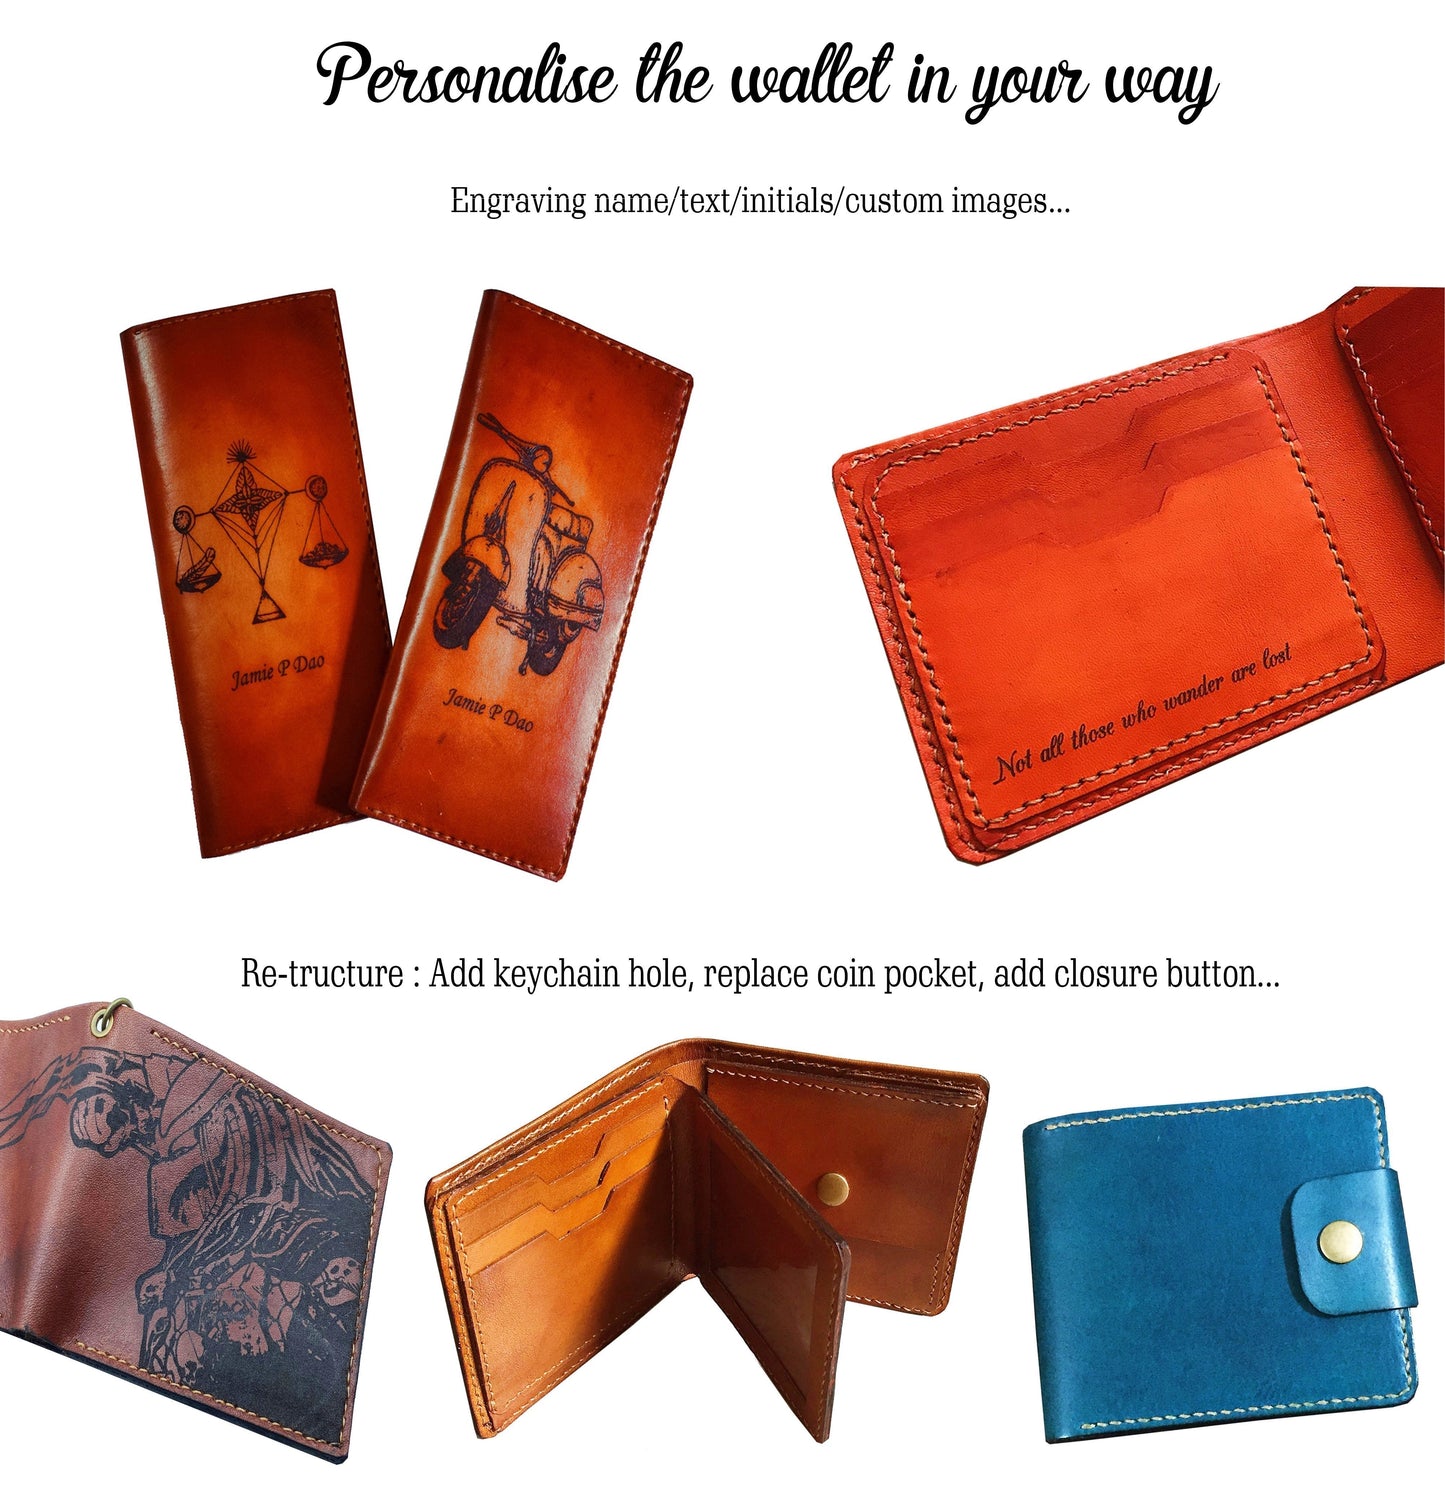 Mayan Corner - Personalized genuine leather handmade wallet, leather gift ideas for him, ninja turtle leather art wallet - 0111223